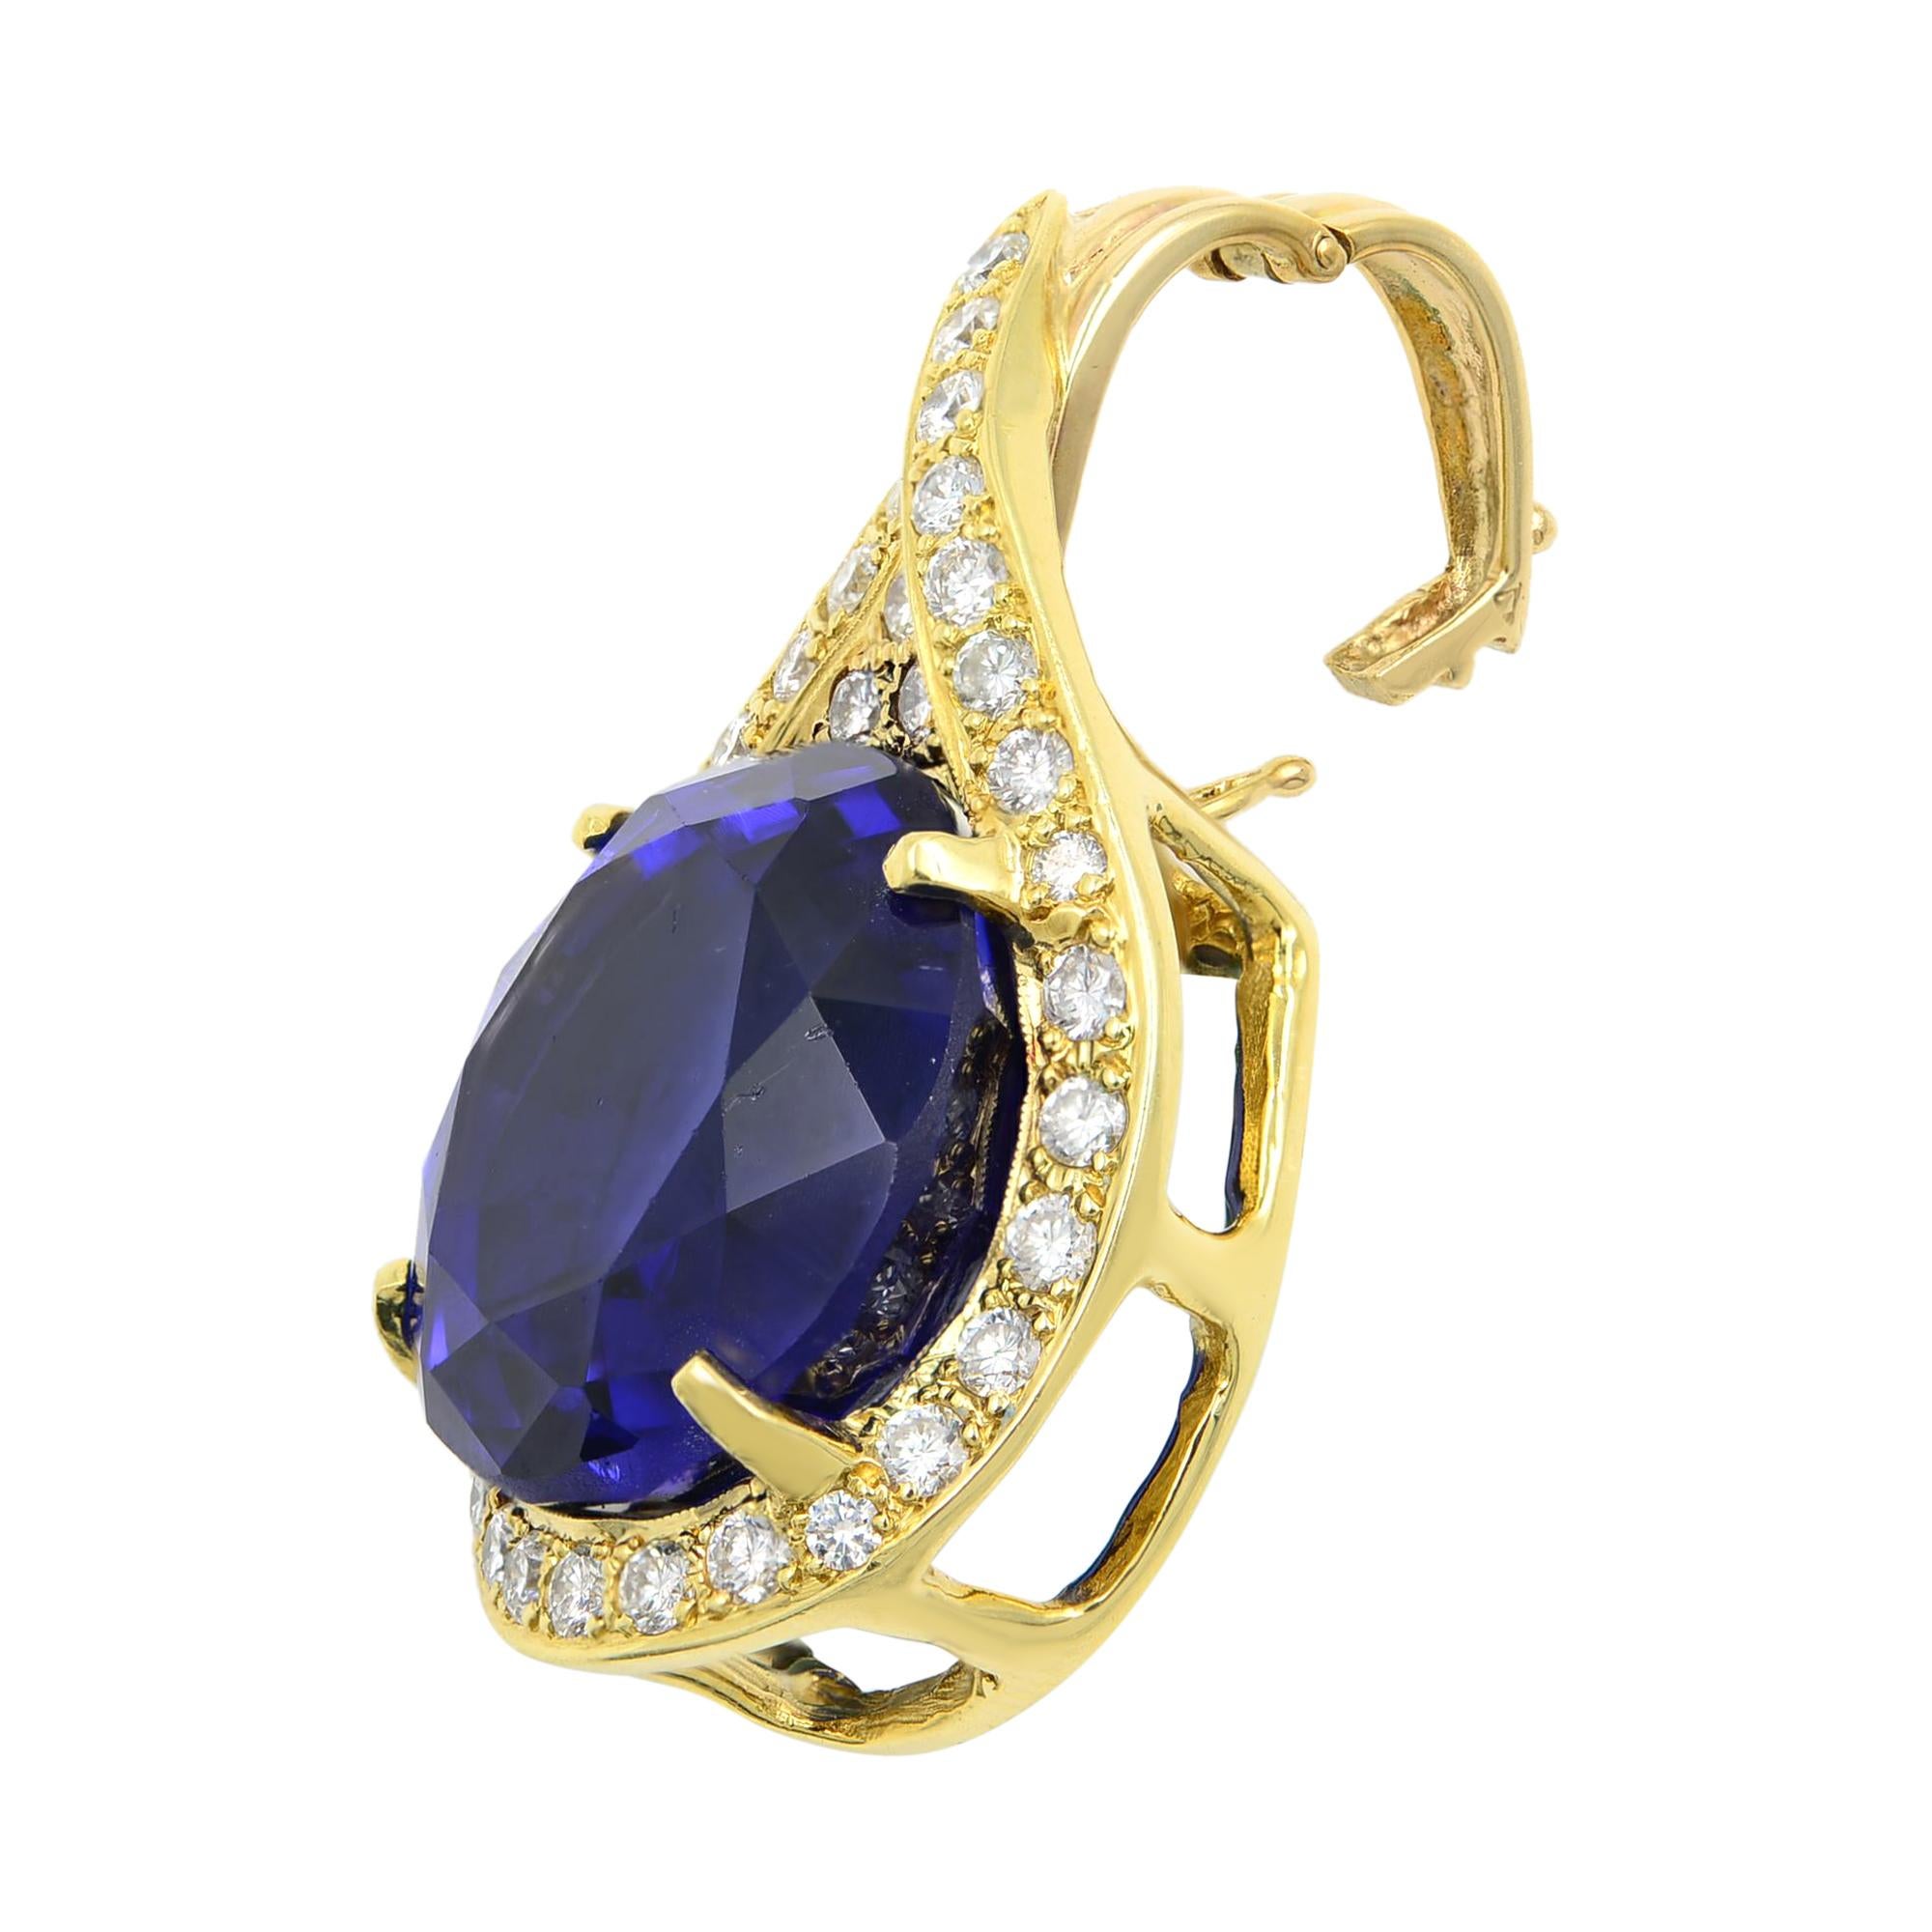 Rachel Koen Oval Tanzanite 27.66ct Diamond 1.75ct Pendant 14K Yellow Gold In Excellent Condition For Sale In New York, NY